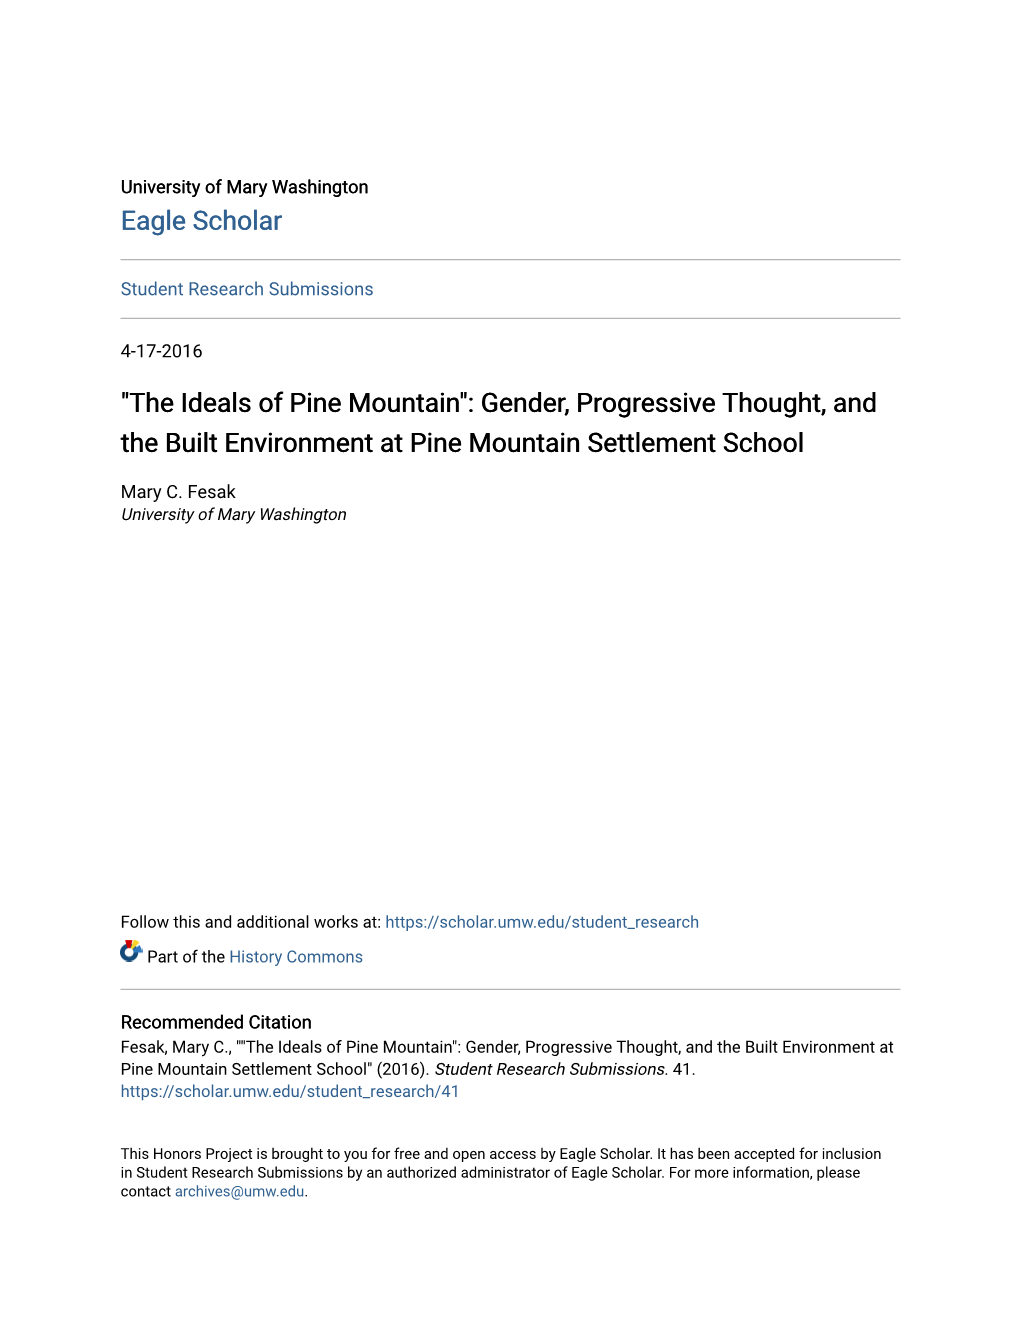 Gender, Progressive Thought, and the Built Environment at Pine Mountain Settlement School